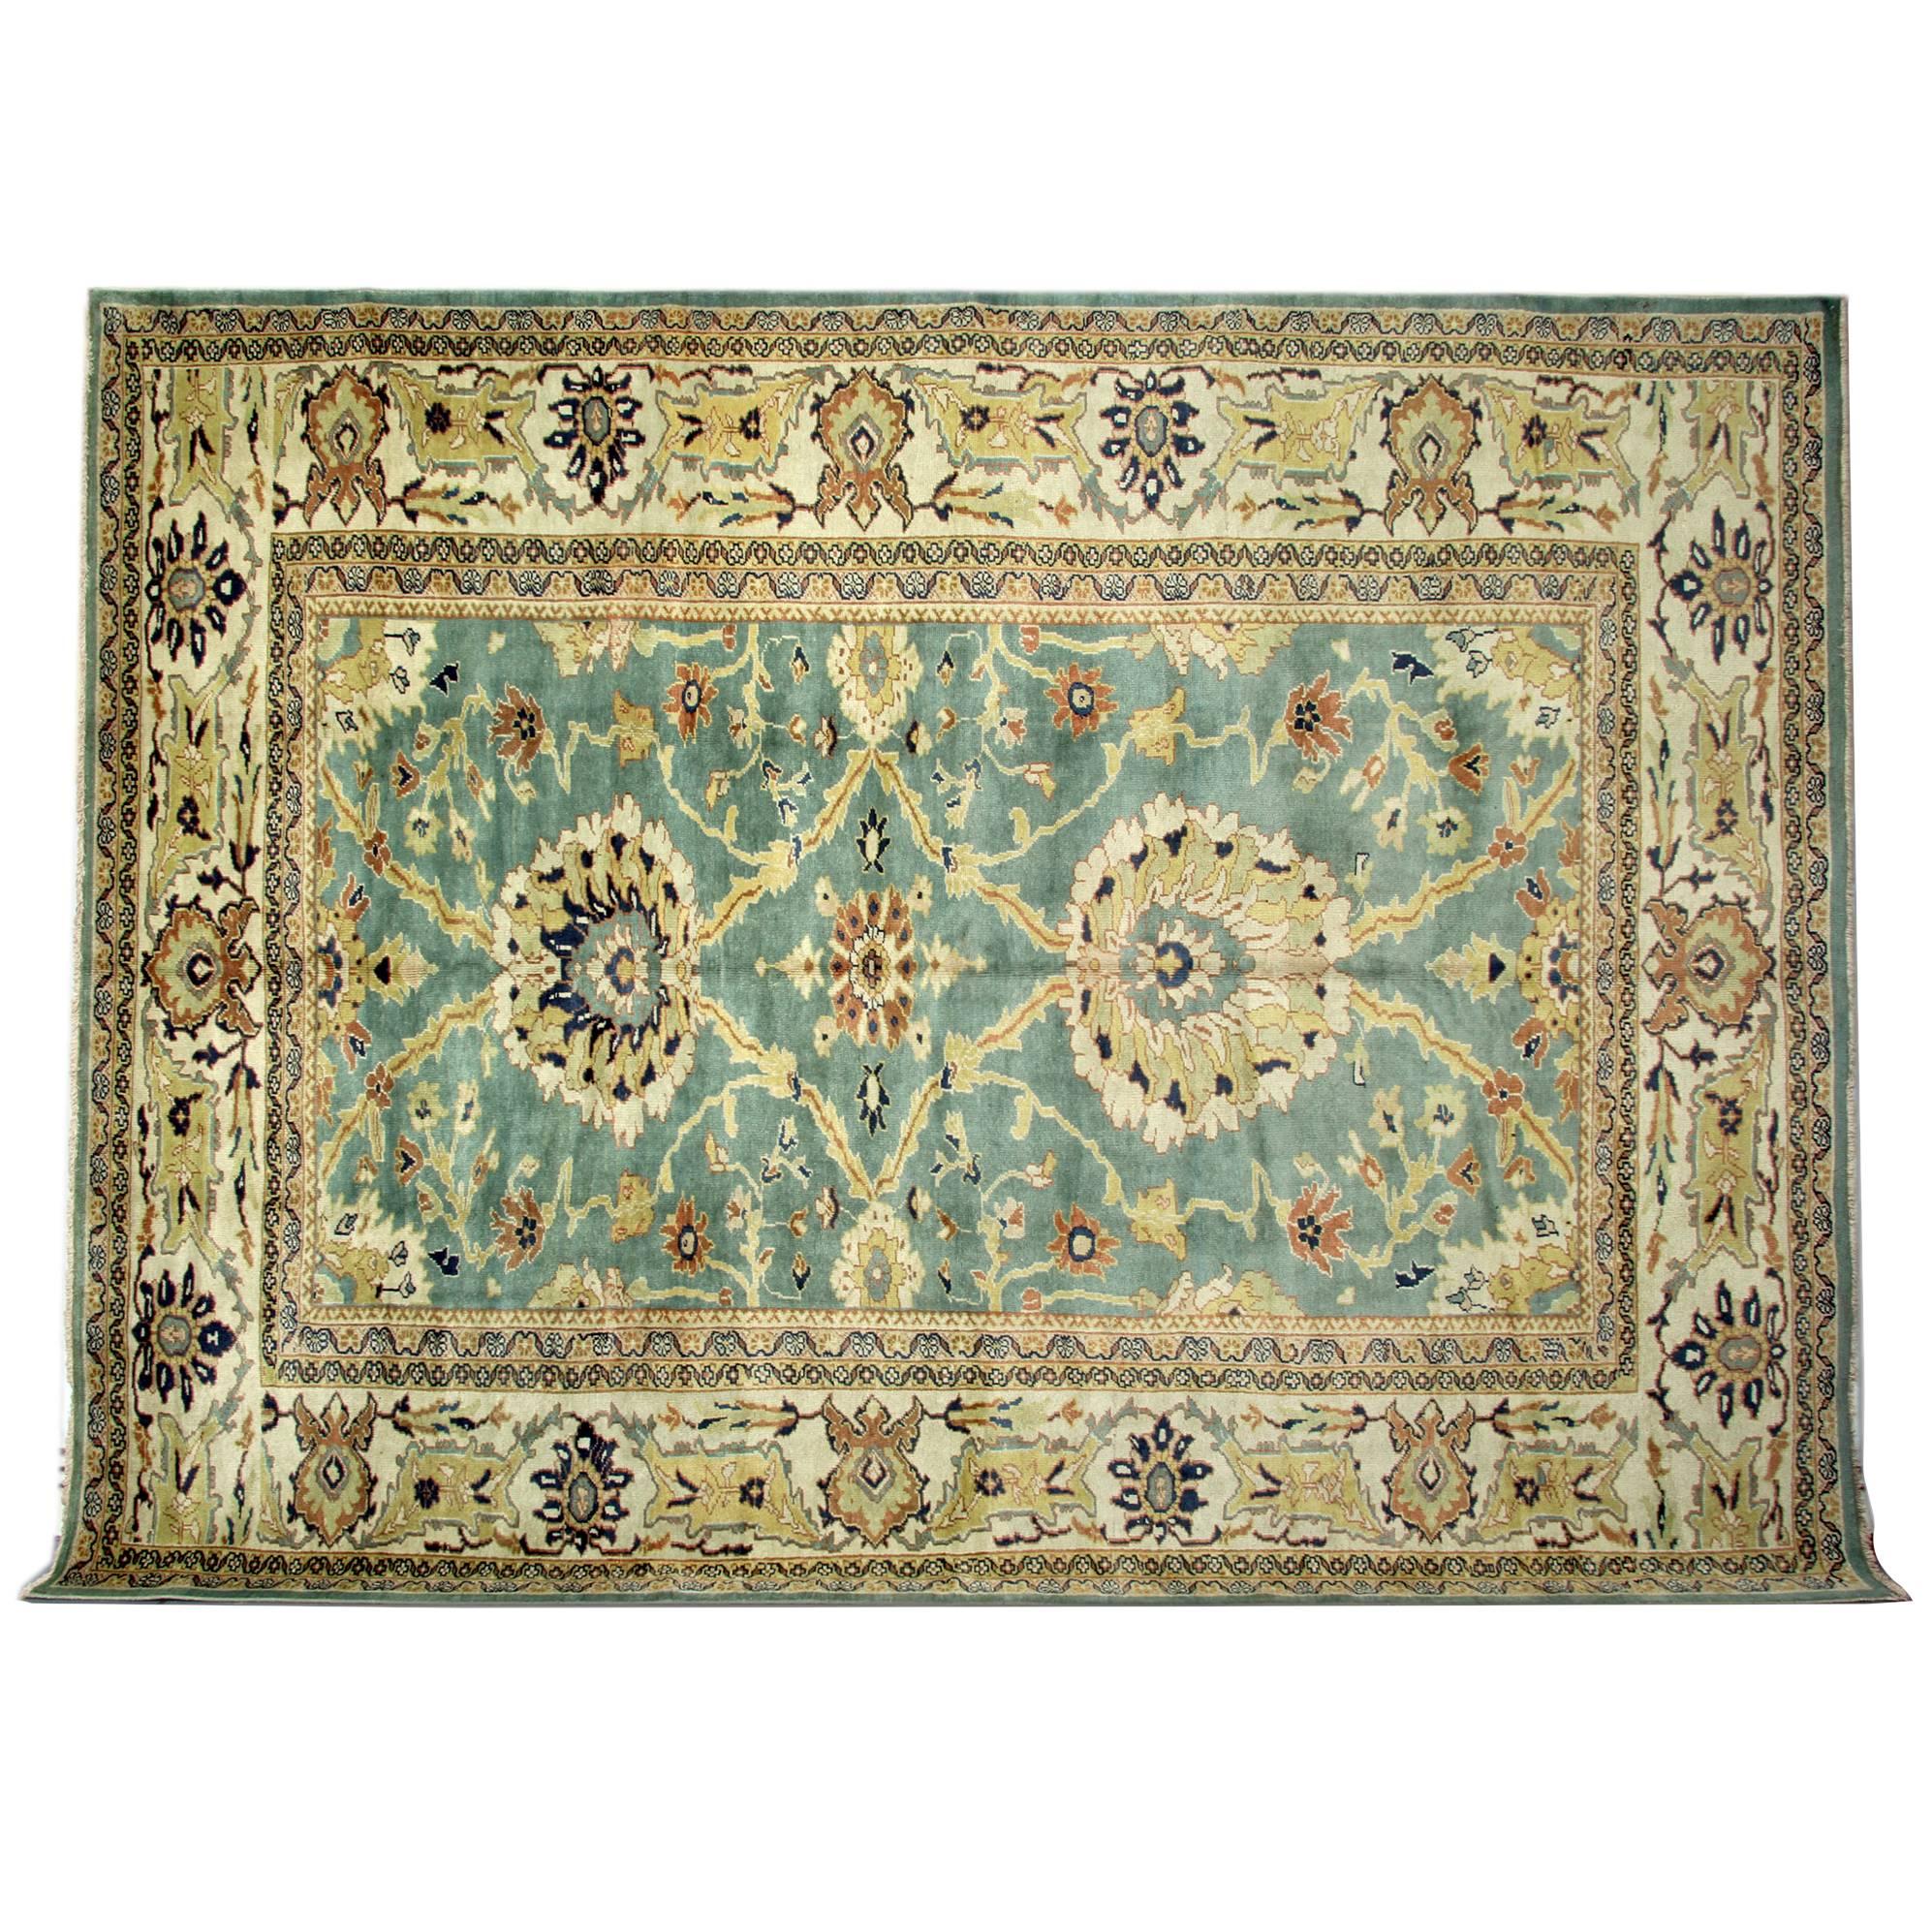 Antique Rugs, Persian Rugs, Persian Carpet, Ziegler Mahal Carpet from Sultanabad